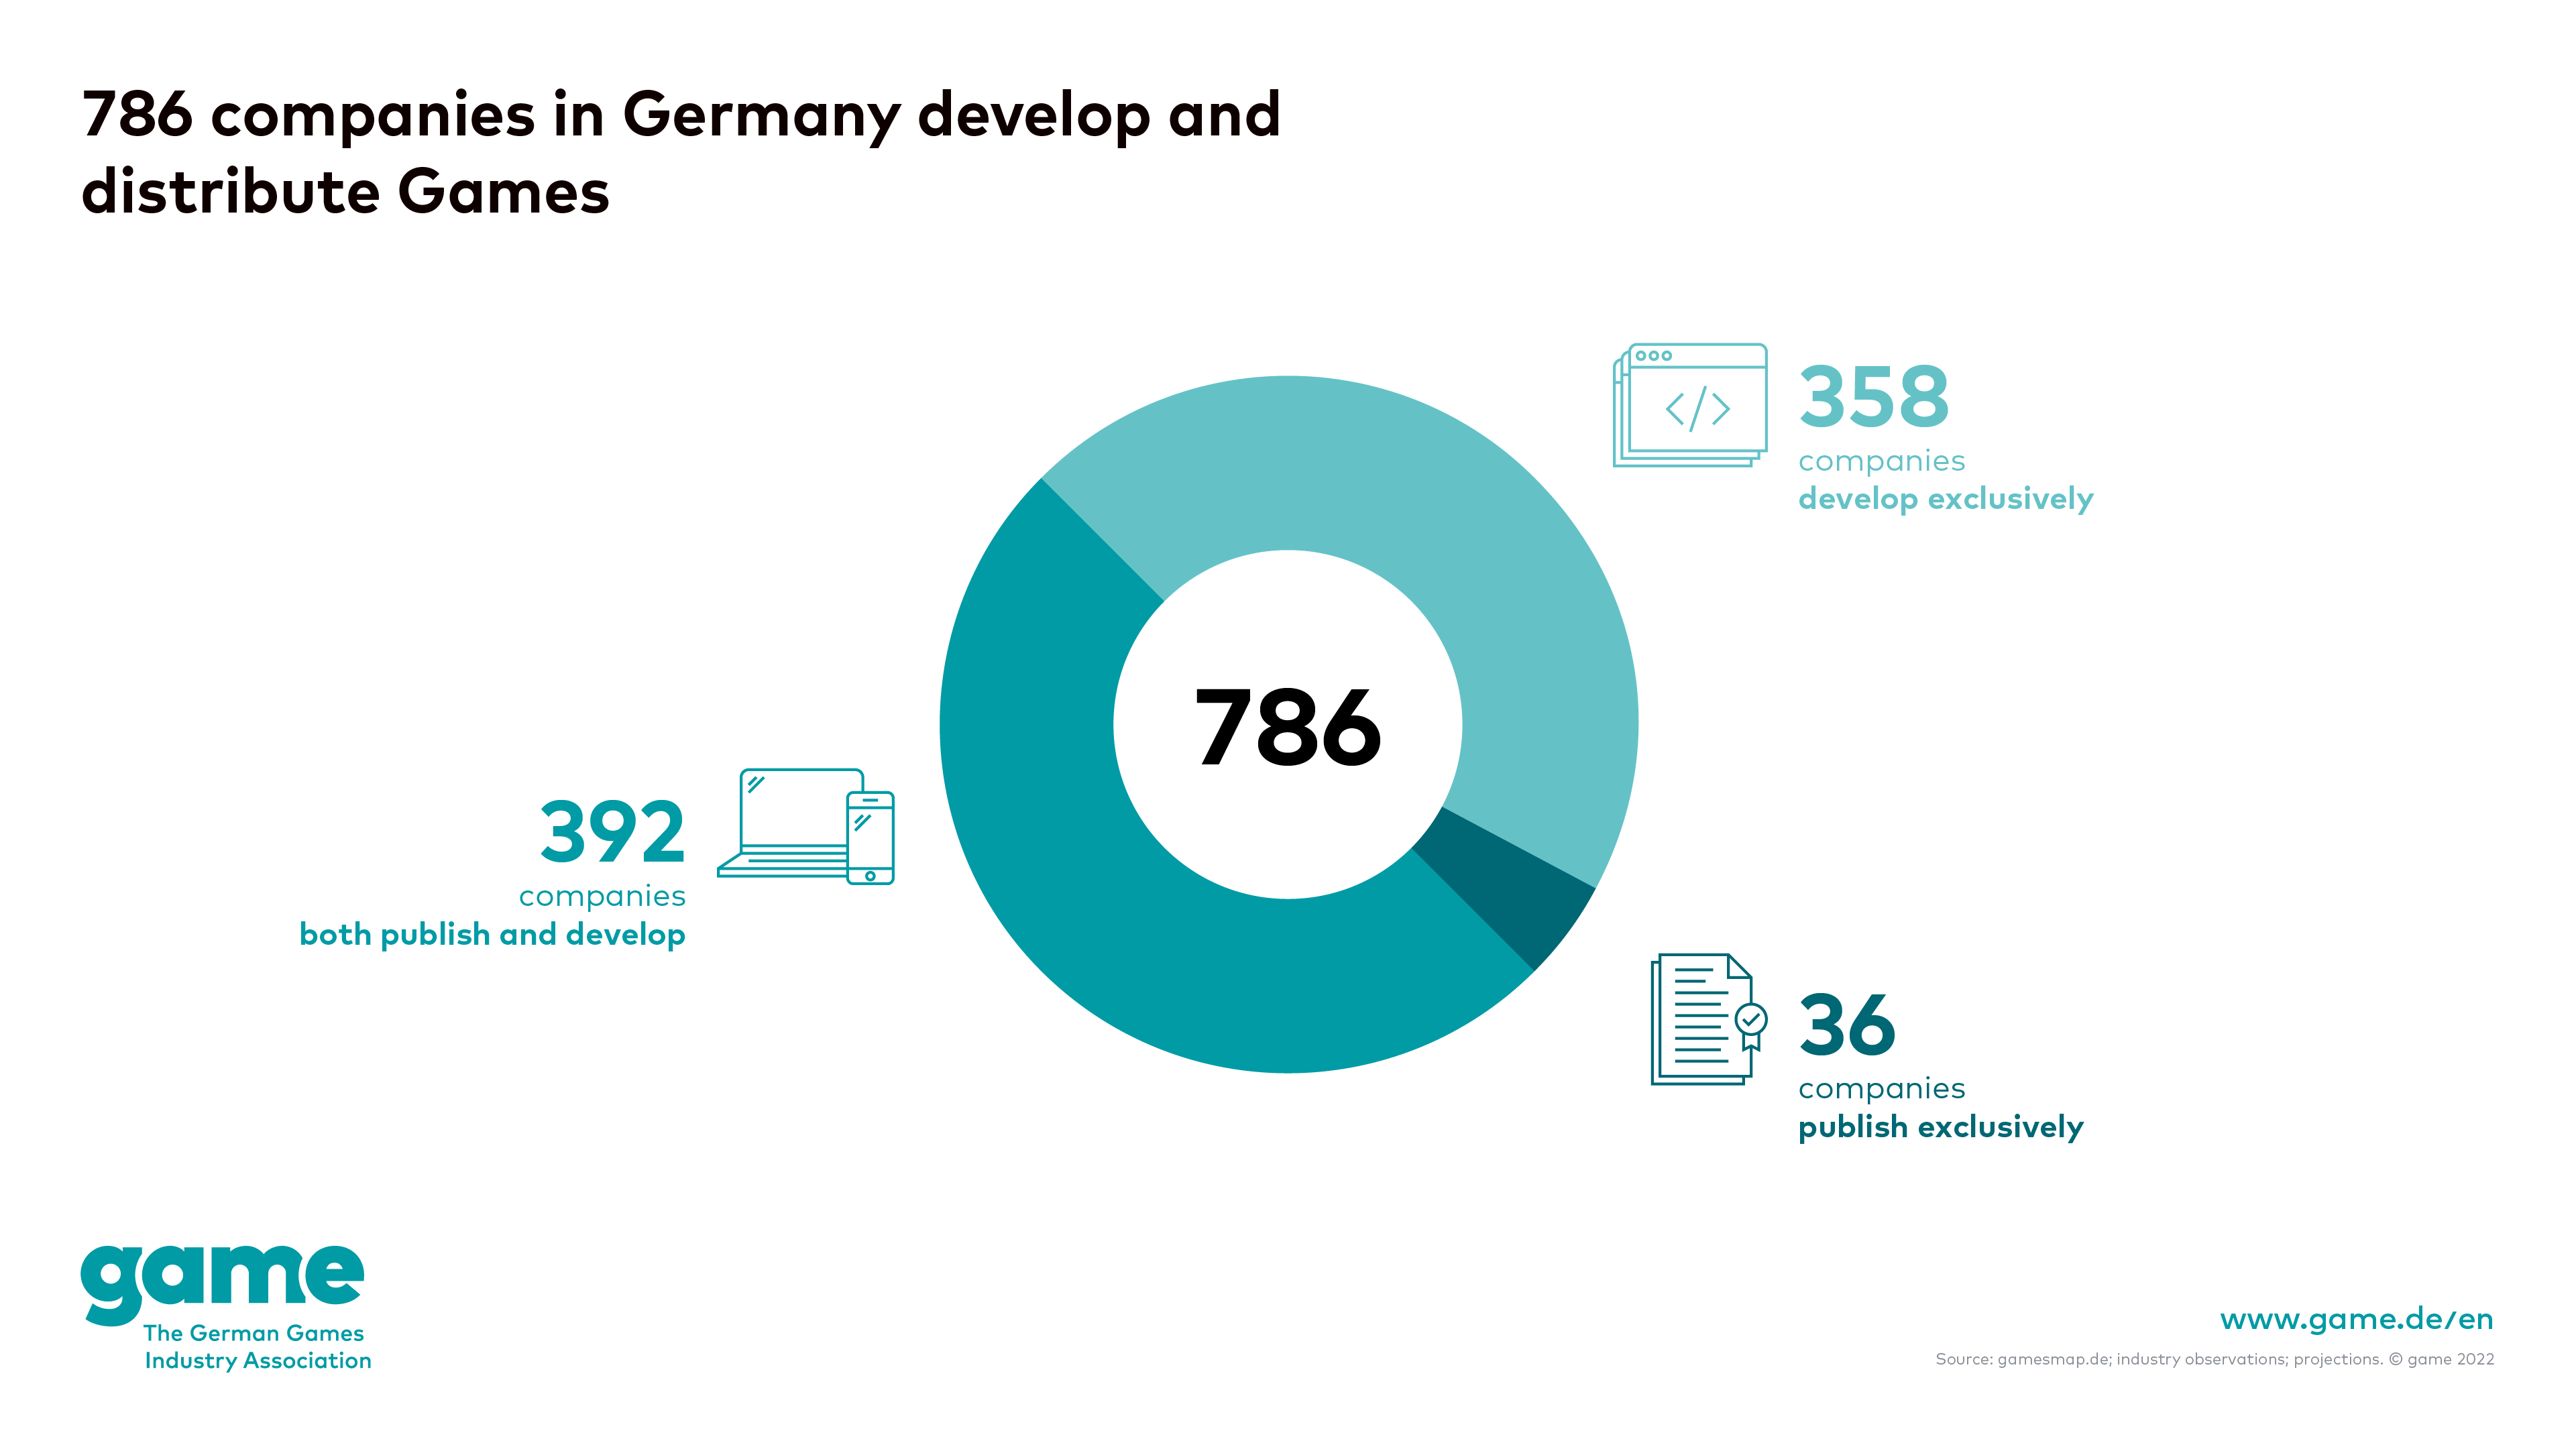 786 companies in Germany develop and distribute games